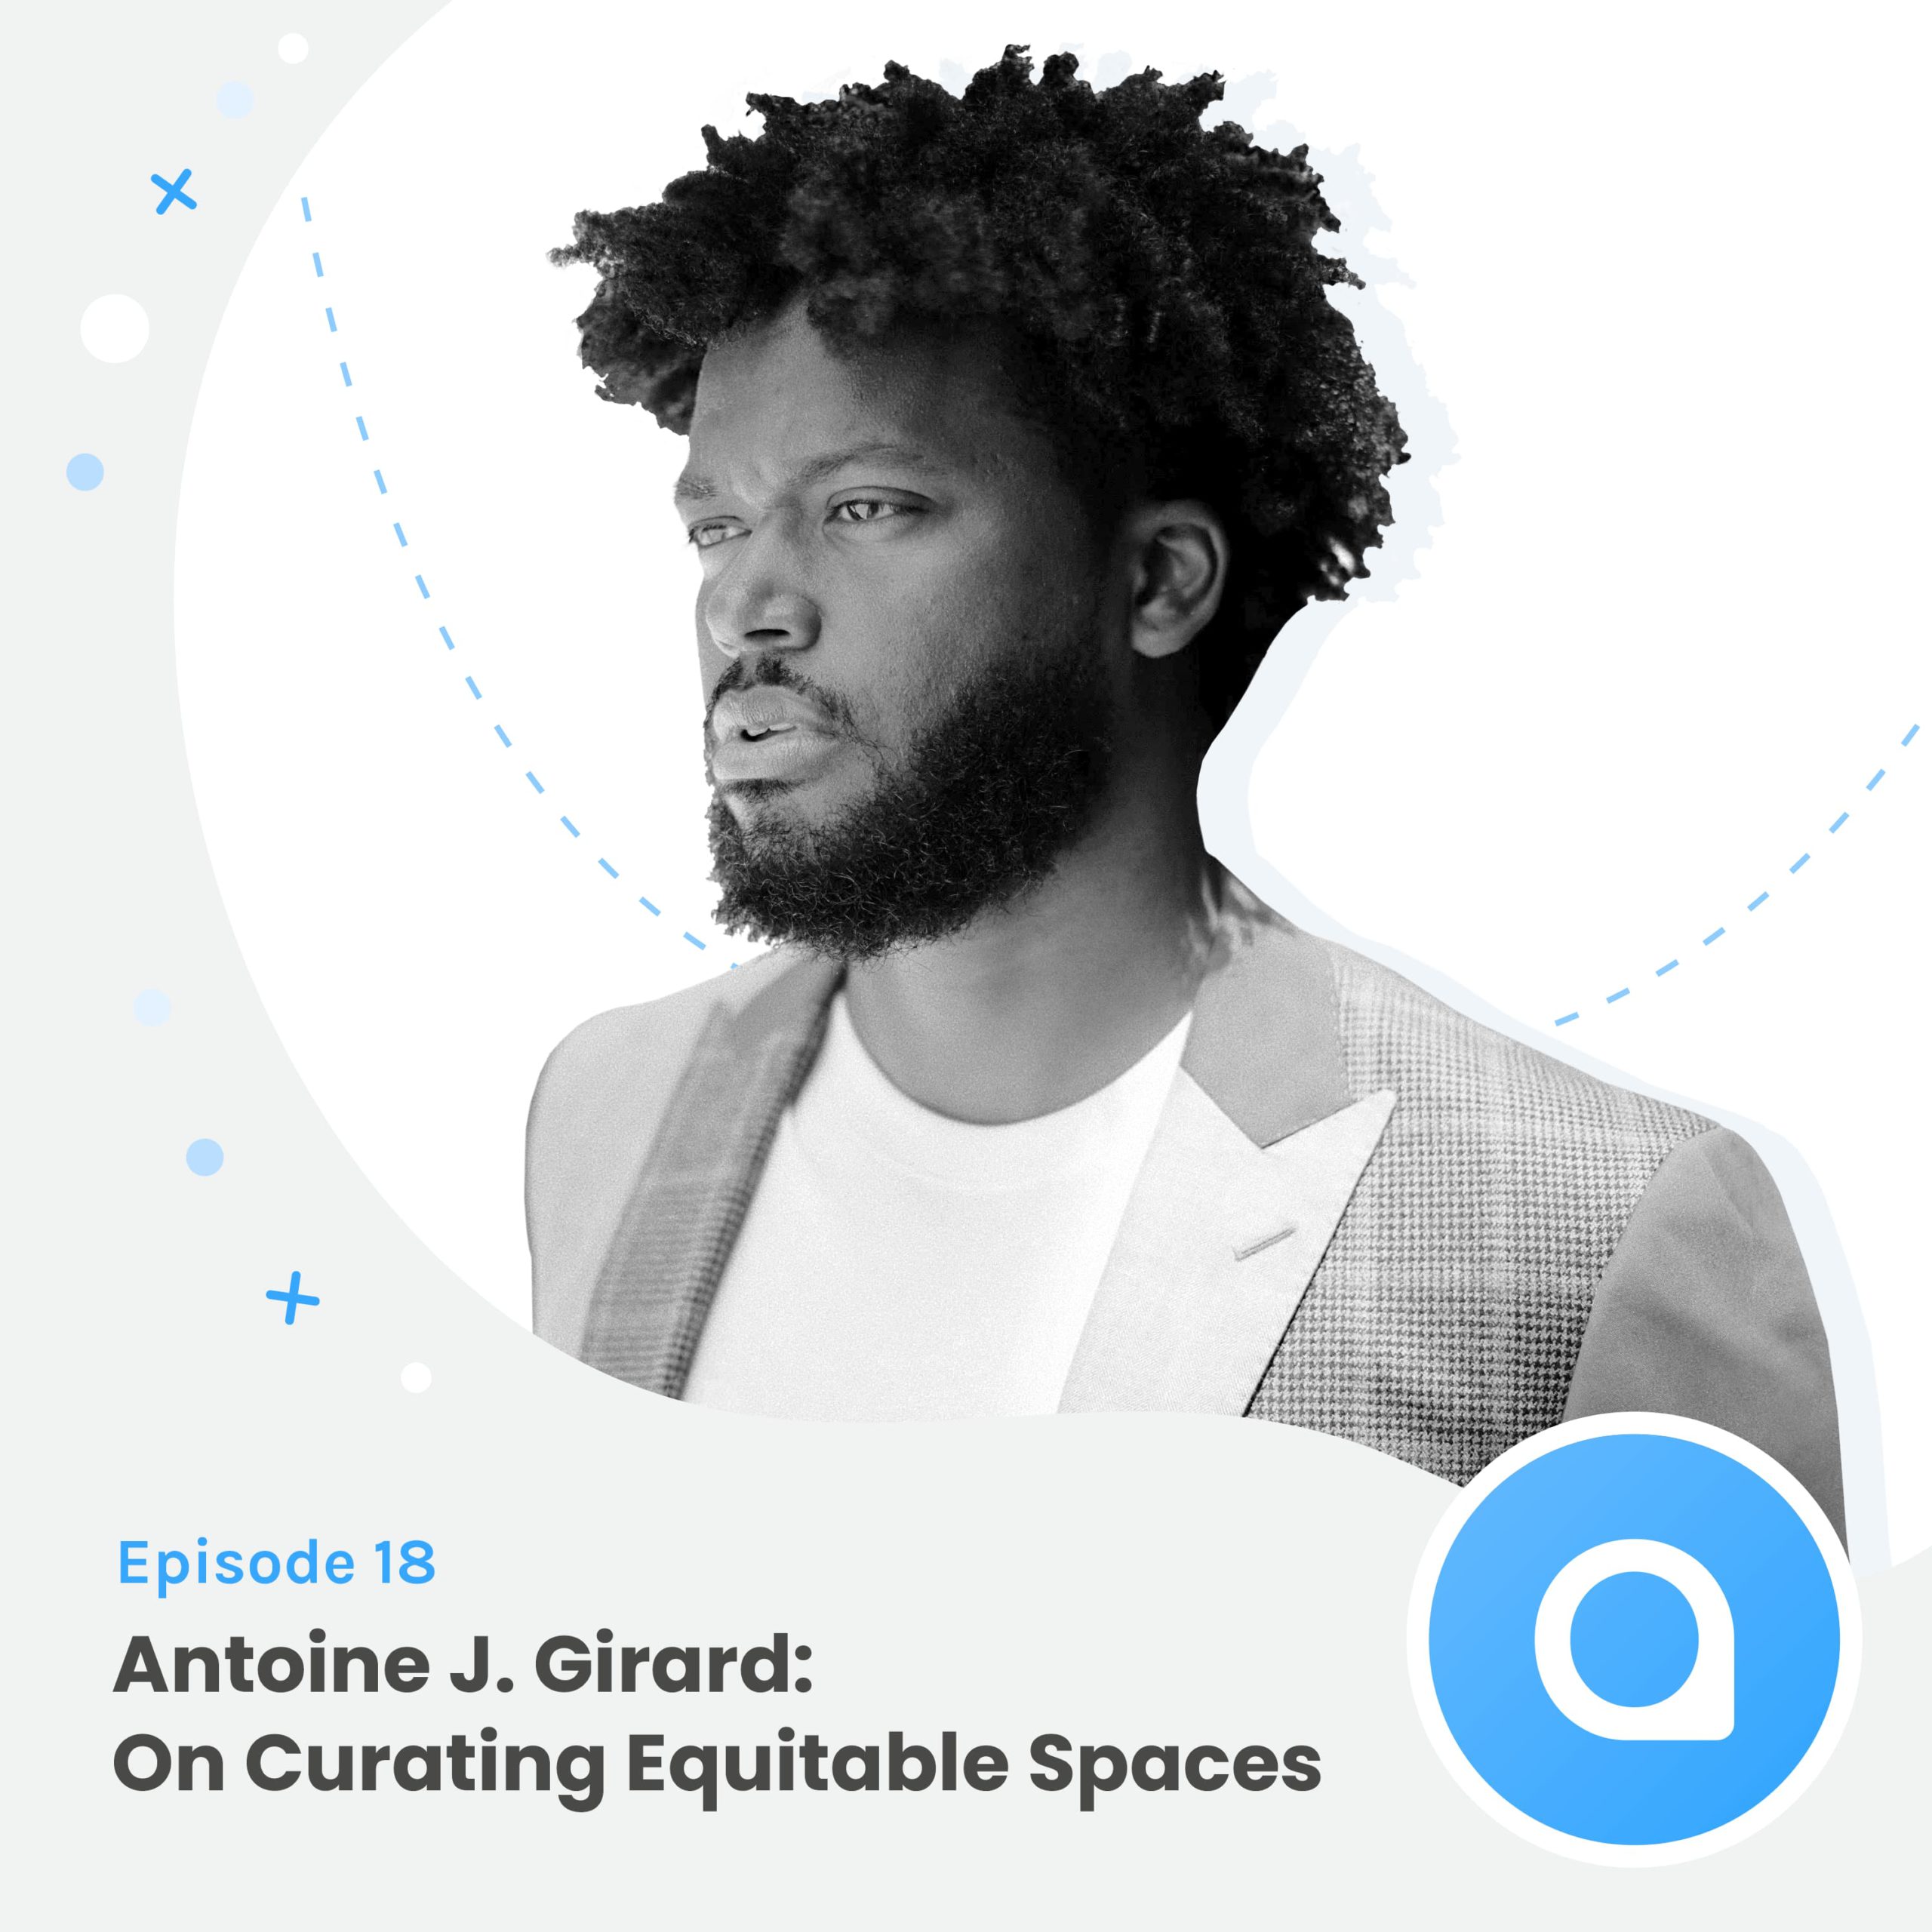 Antoine J. Girard: On Curating Equitable Spaces